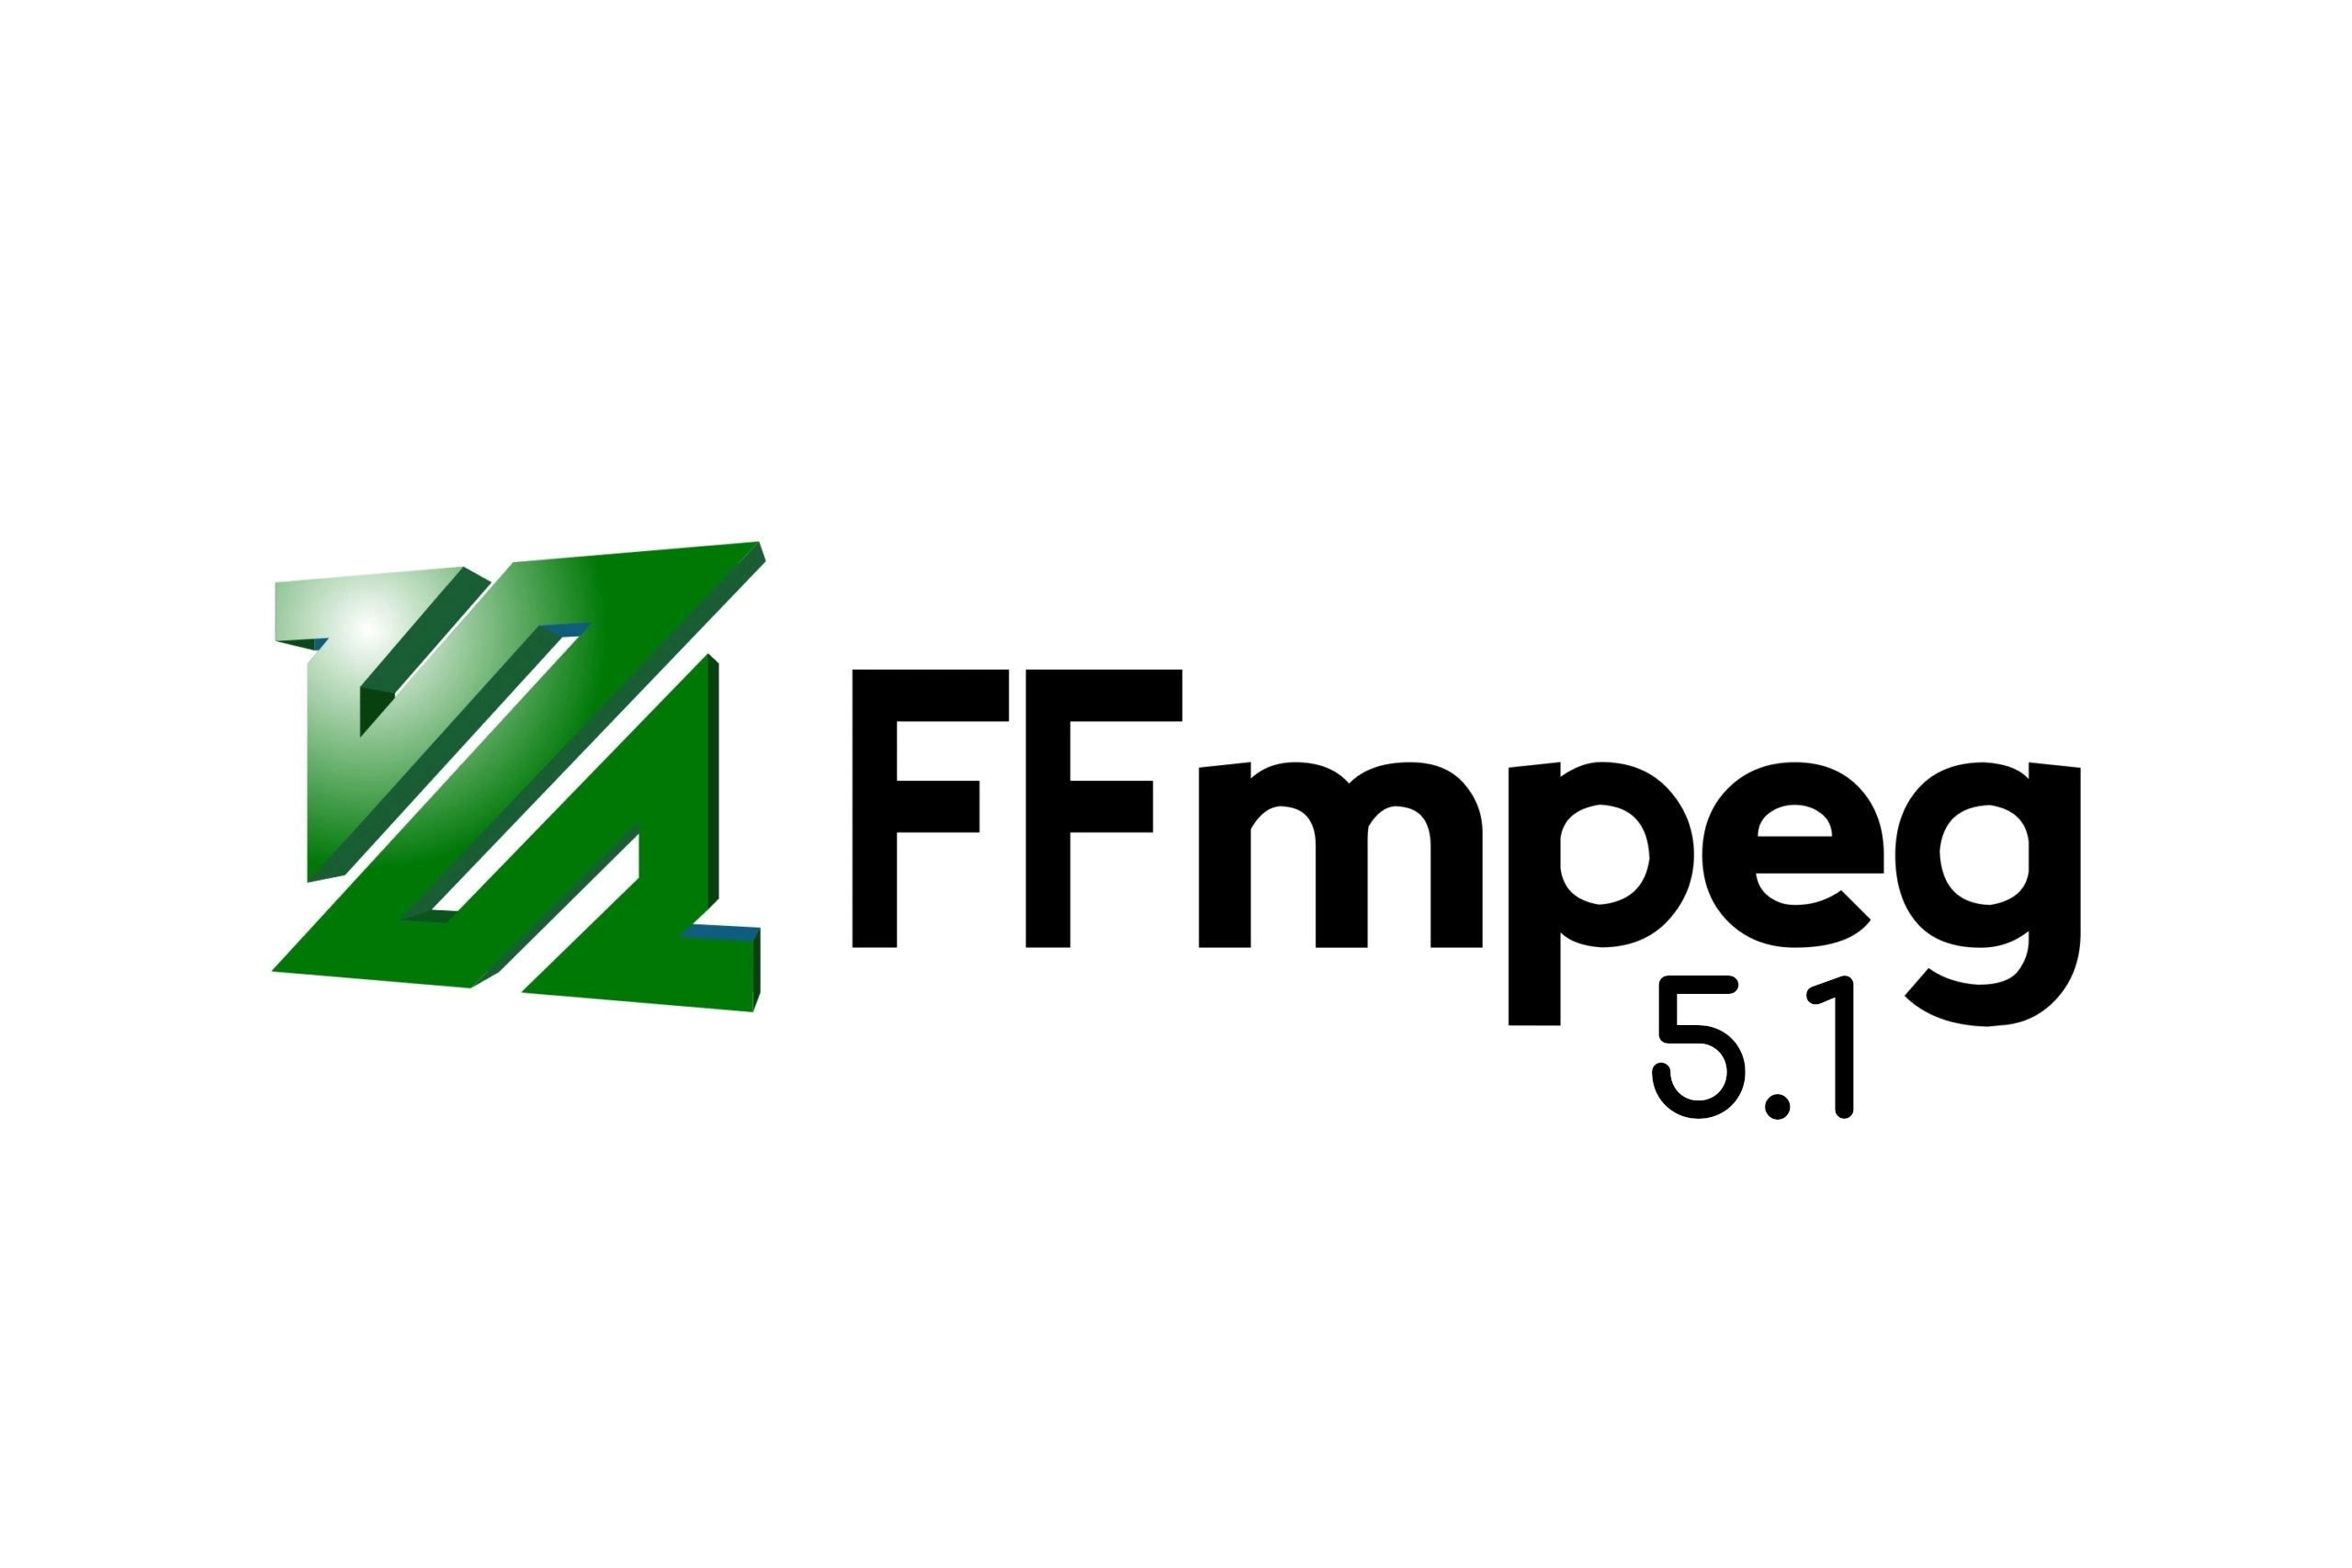 FFmpeg 5.1 “Riemann” LTS Released with VDPAU AV1 Hardware Acceleration, New Filters